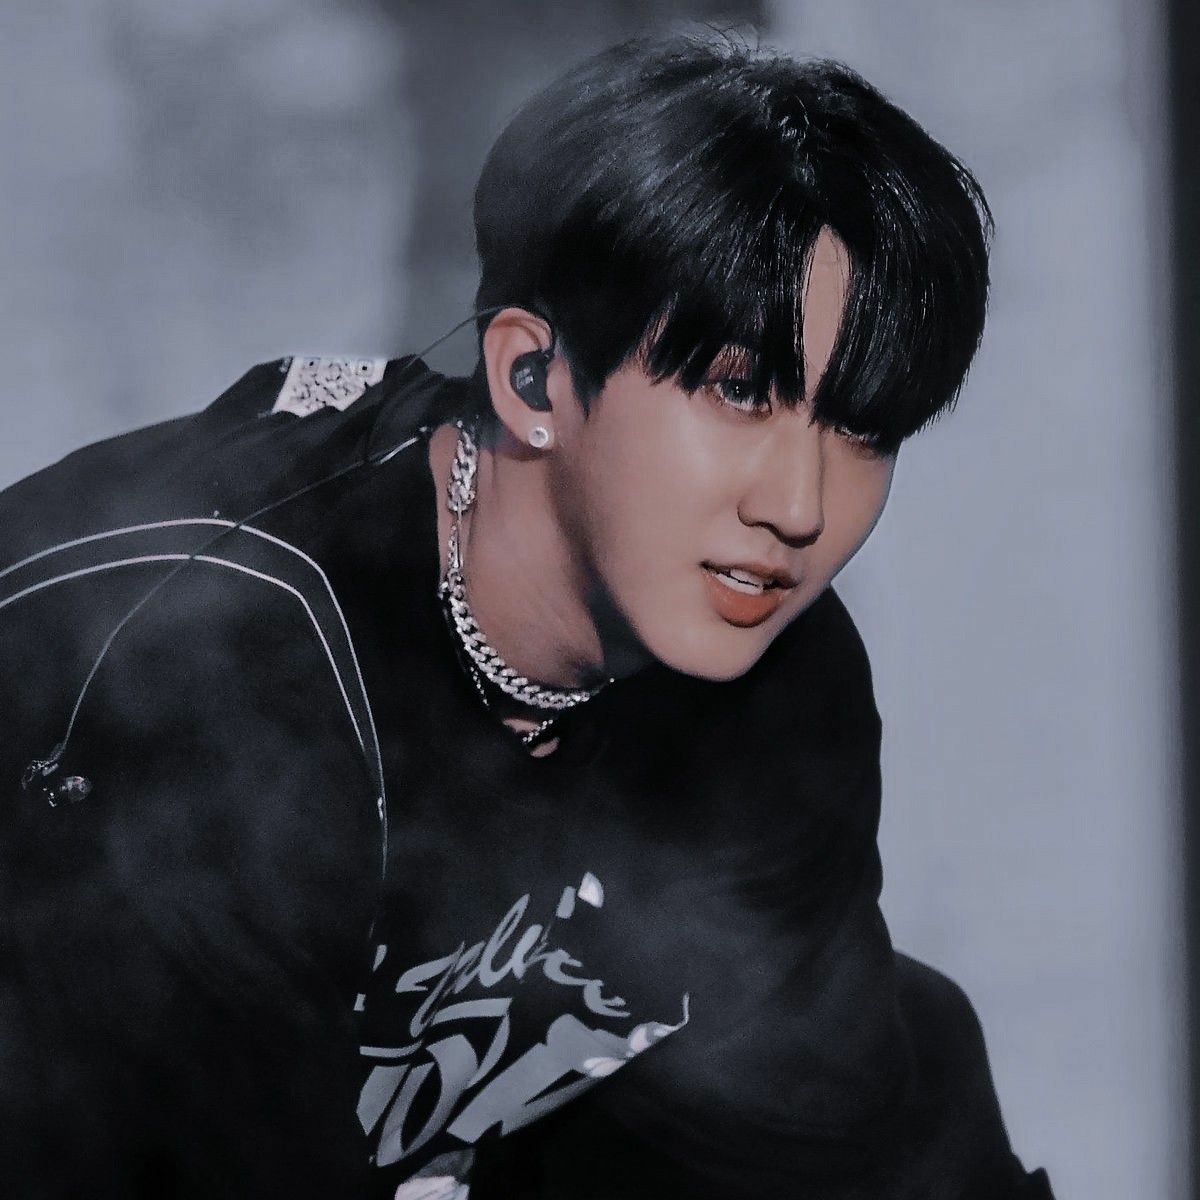 This, and many more, are the reasons why  #Changbin is such an important person, both to Stray Kids and to STAY. He's like a pilar. He's strong. He's warm. He's transparent. He's talented beyond measure. And I'm truly thankful for him being who he is. Proudly, unapologetically him